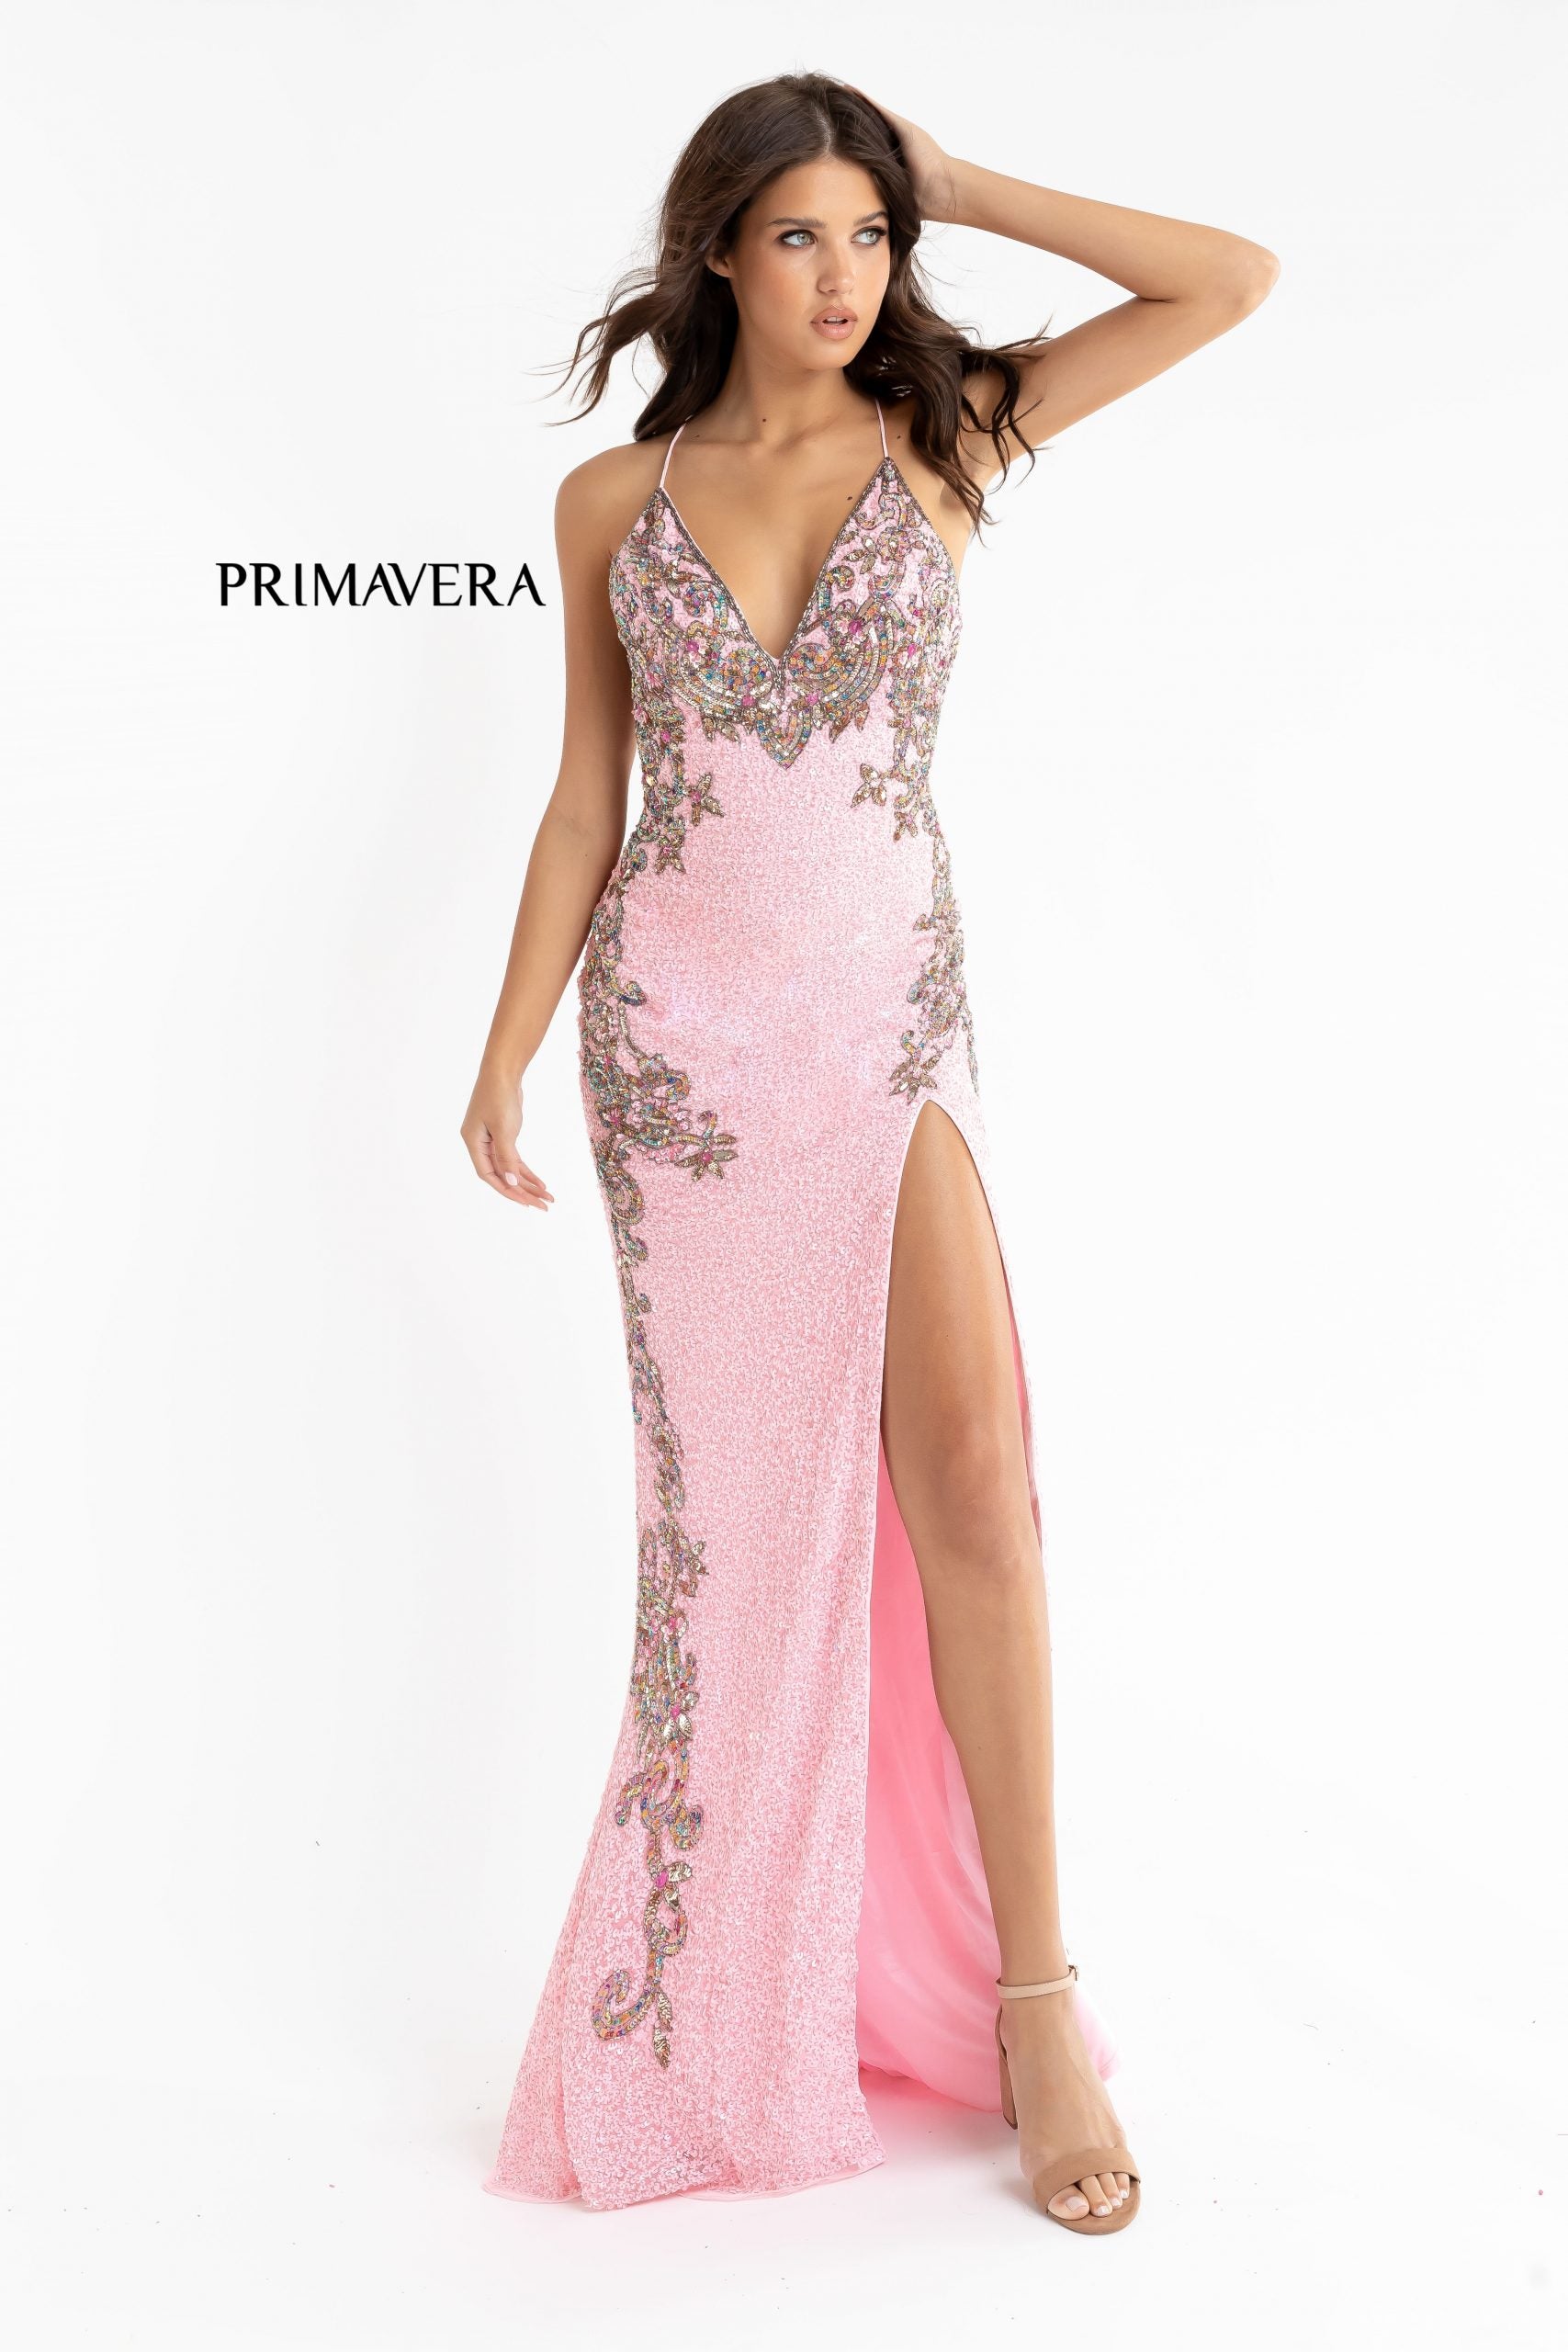 Primavera Couture 3211 baby pink is a Long fitted sequin Embellished Formal Evening Gown. This Prom Dress Features a deep V Neck with an open Corset lace up back. Beaded & embellished elegant scroll pattern accentuate curves. Fully beaded prom dress with floral pattern and side slit. Long Sequin Gown featuring a v neckline. slit in the fitted skirt, Slit in Thigh. Stunning Pageant Dress, Prom Gown & More!